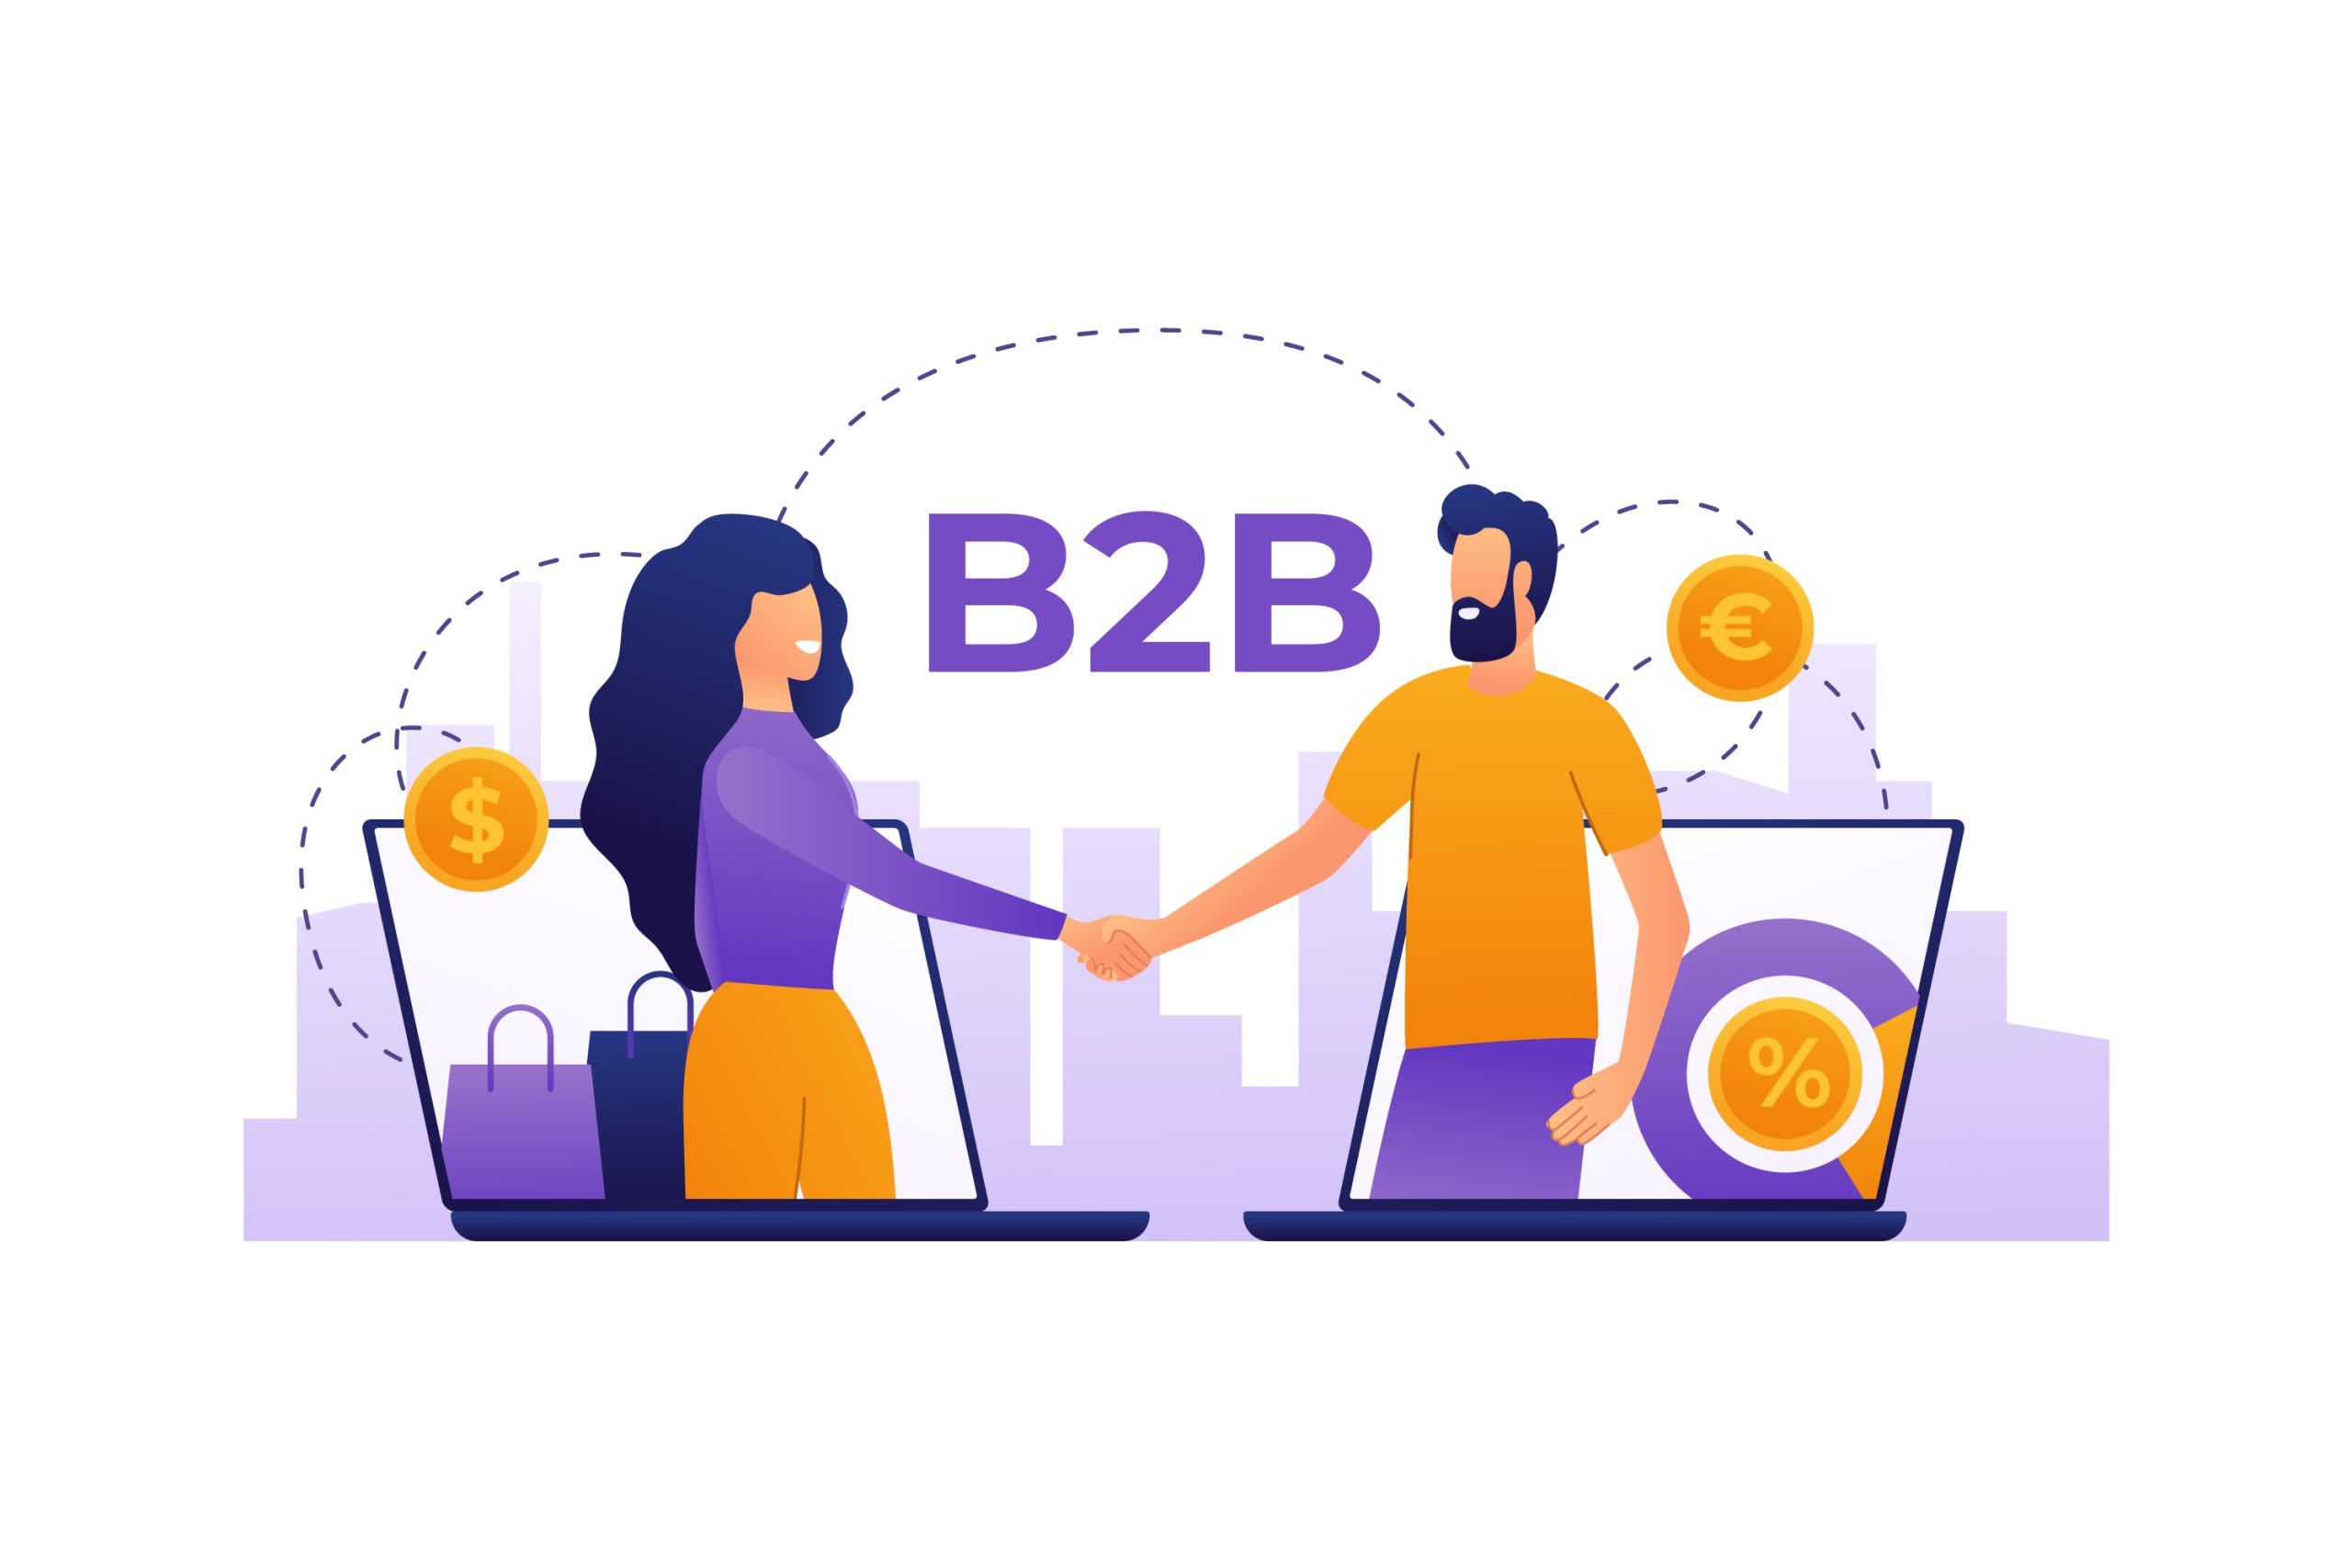 Image depicting the concept of a B2B marketplace with various business interactions